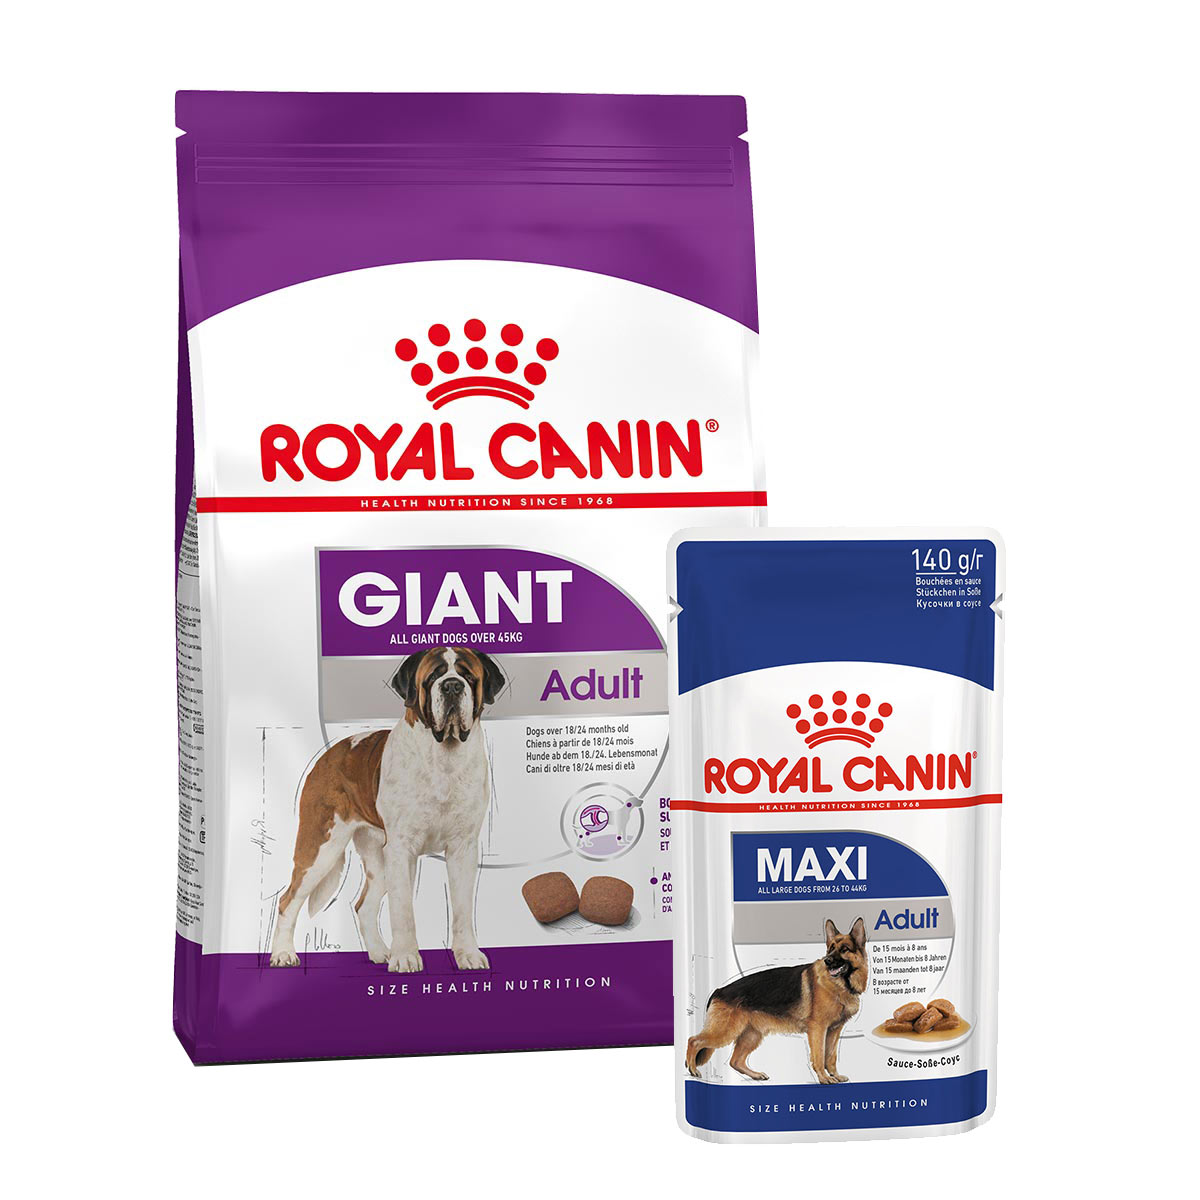 ROYAL CANIN Giant Adult 15 kg + Maxi Adult 10× 140 g